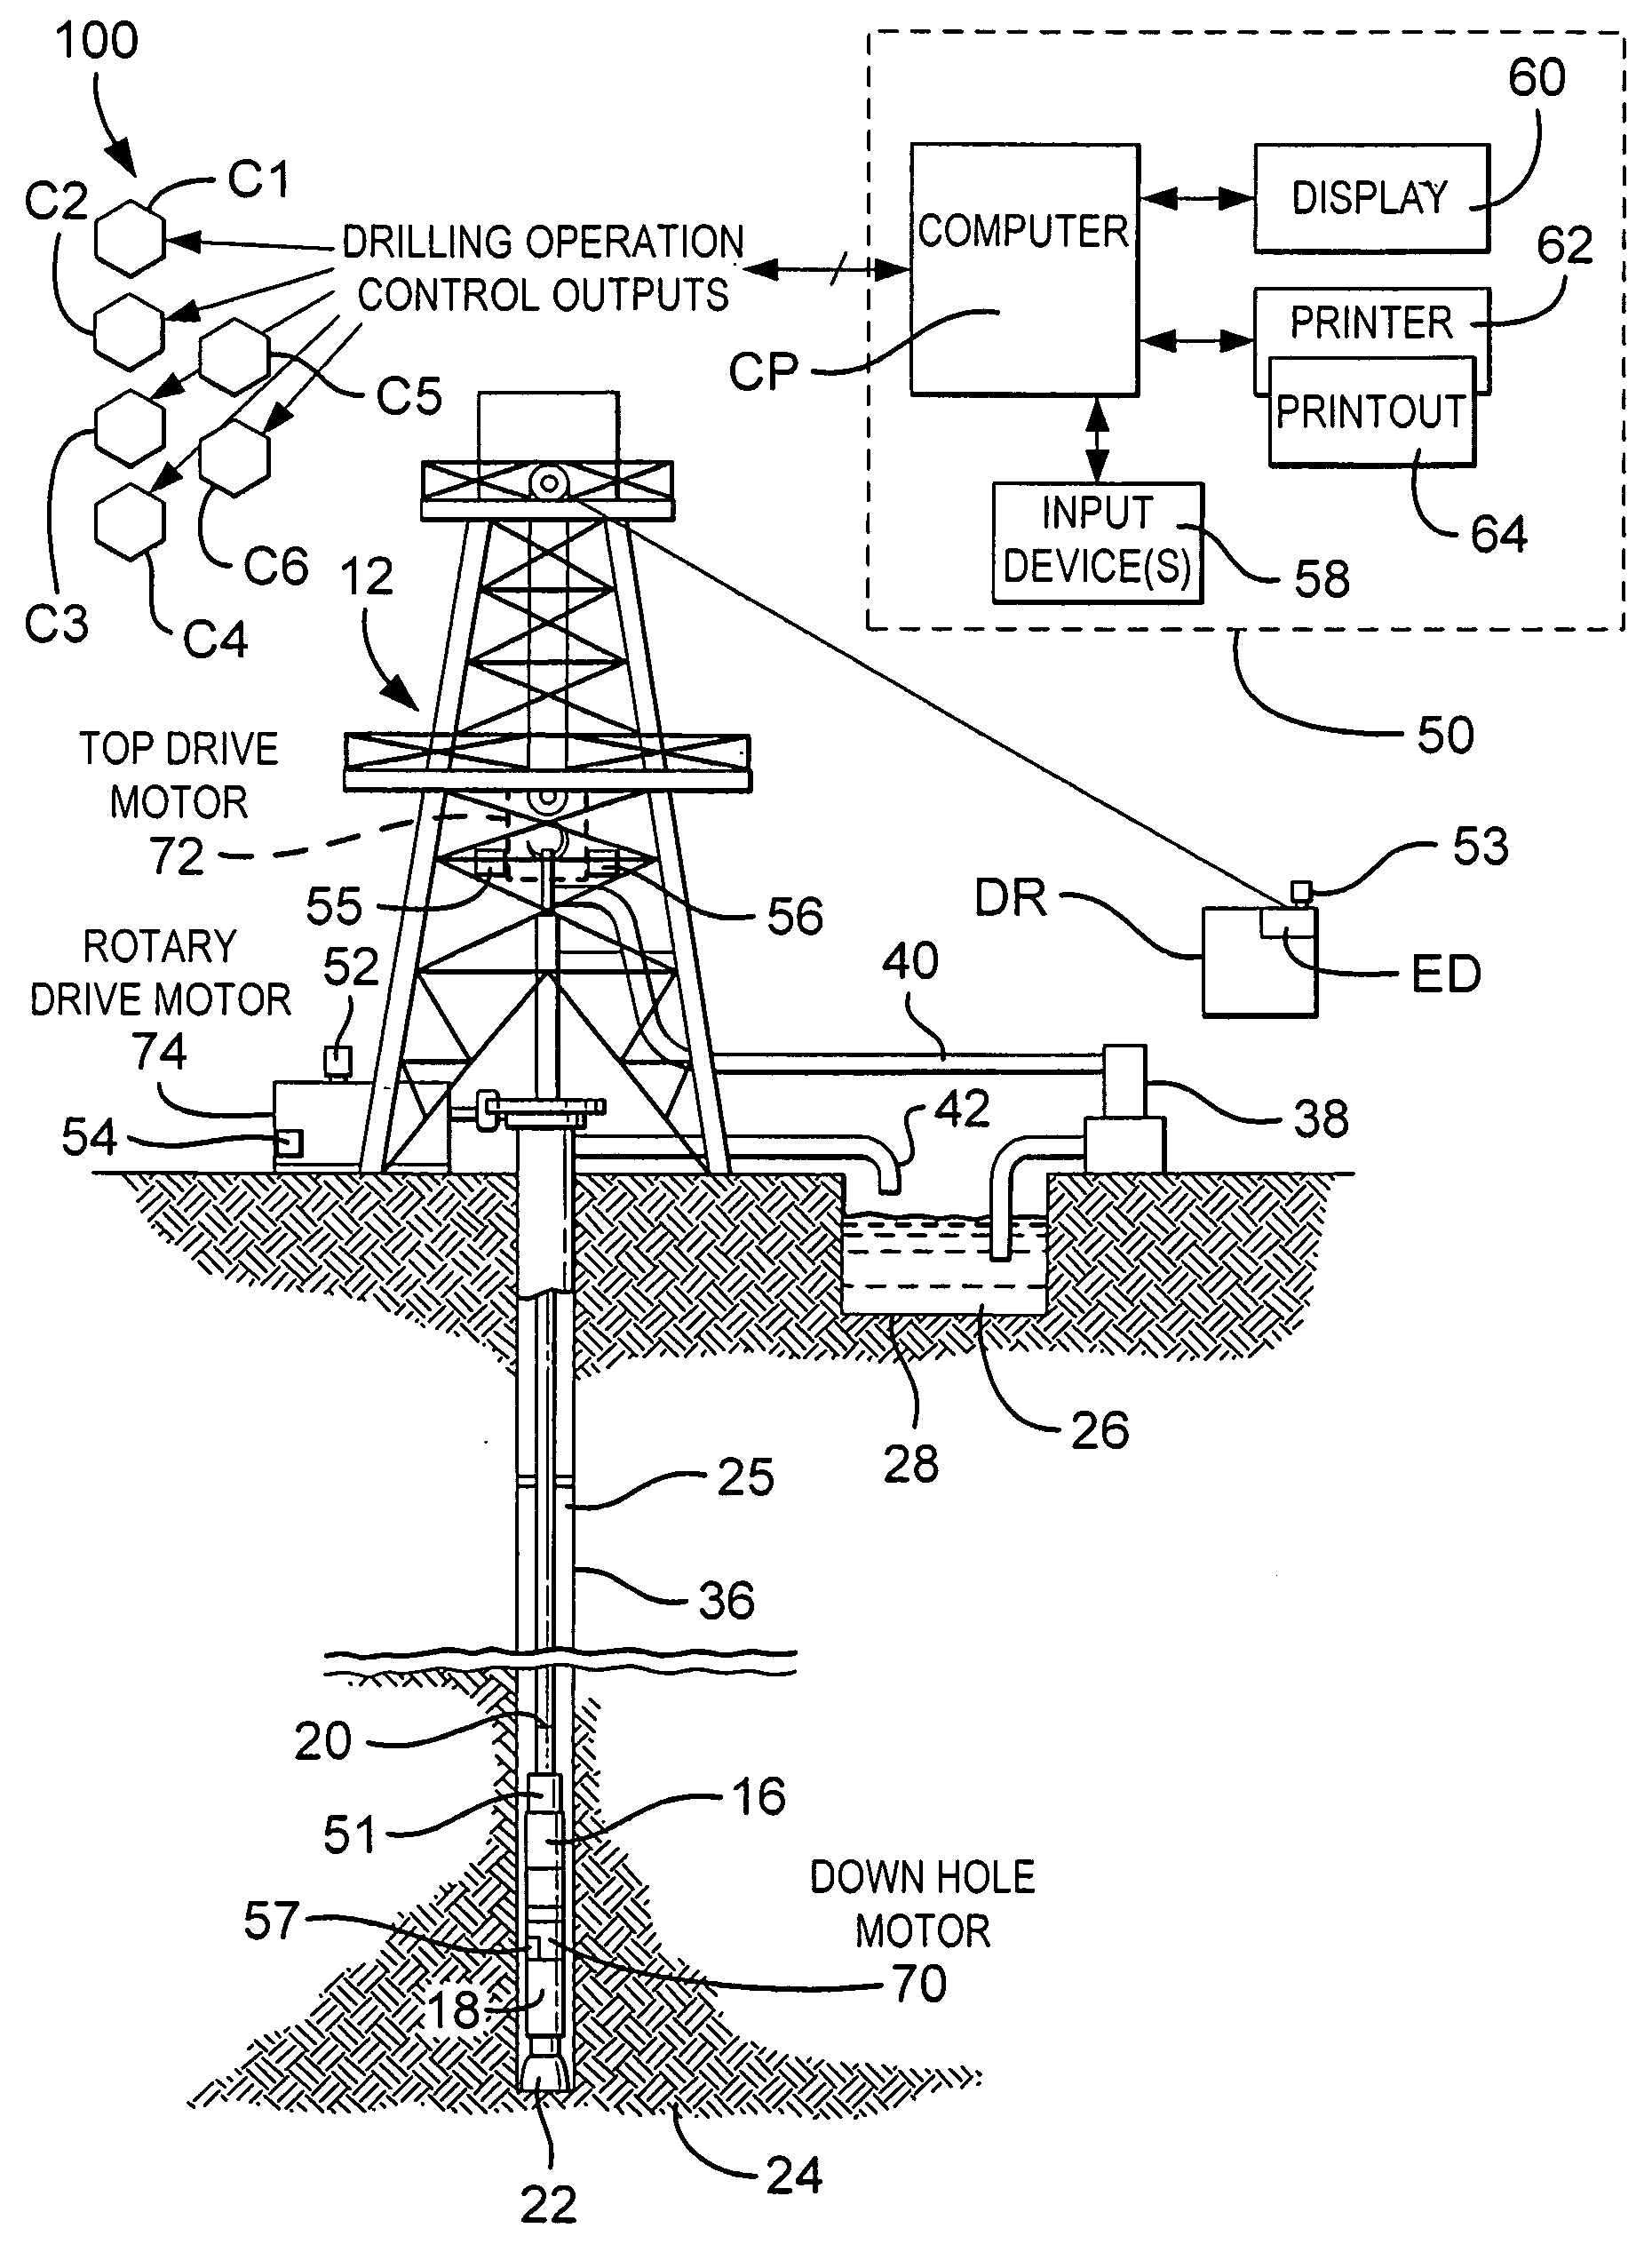 Wellbore operations monitoring and control systems and methods